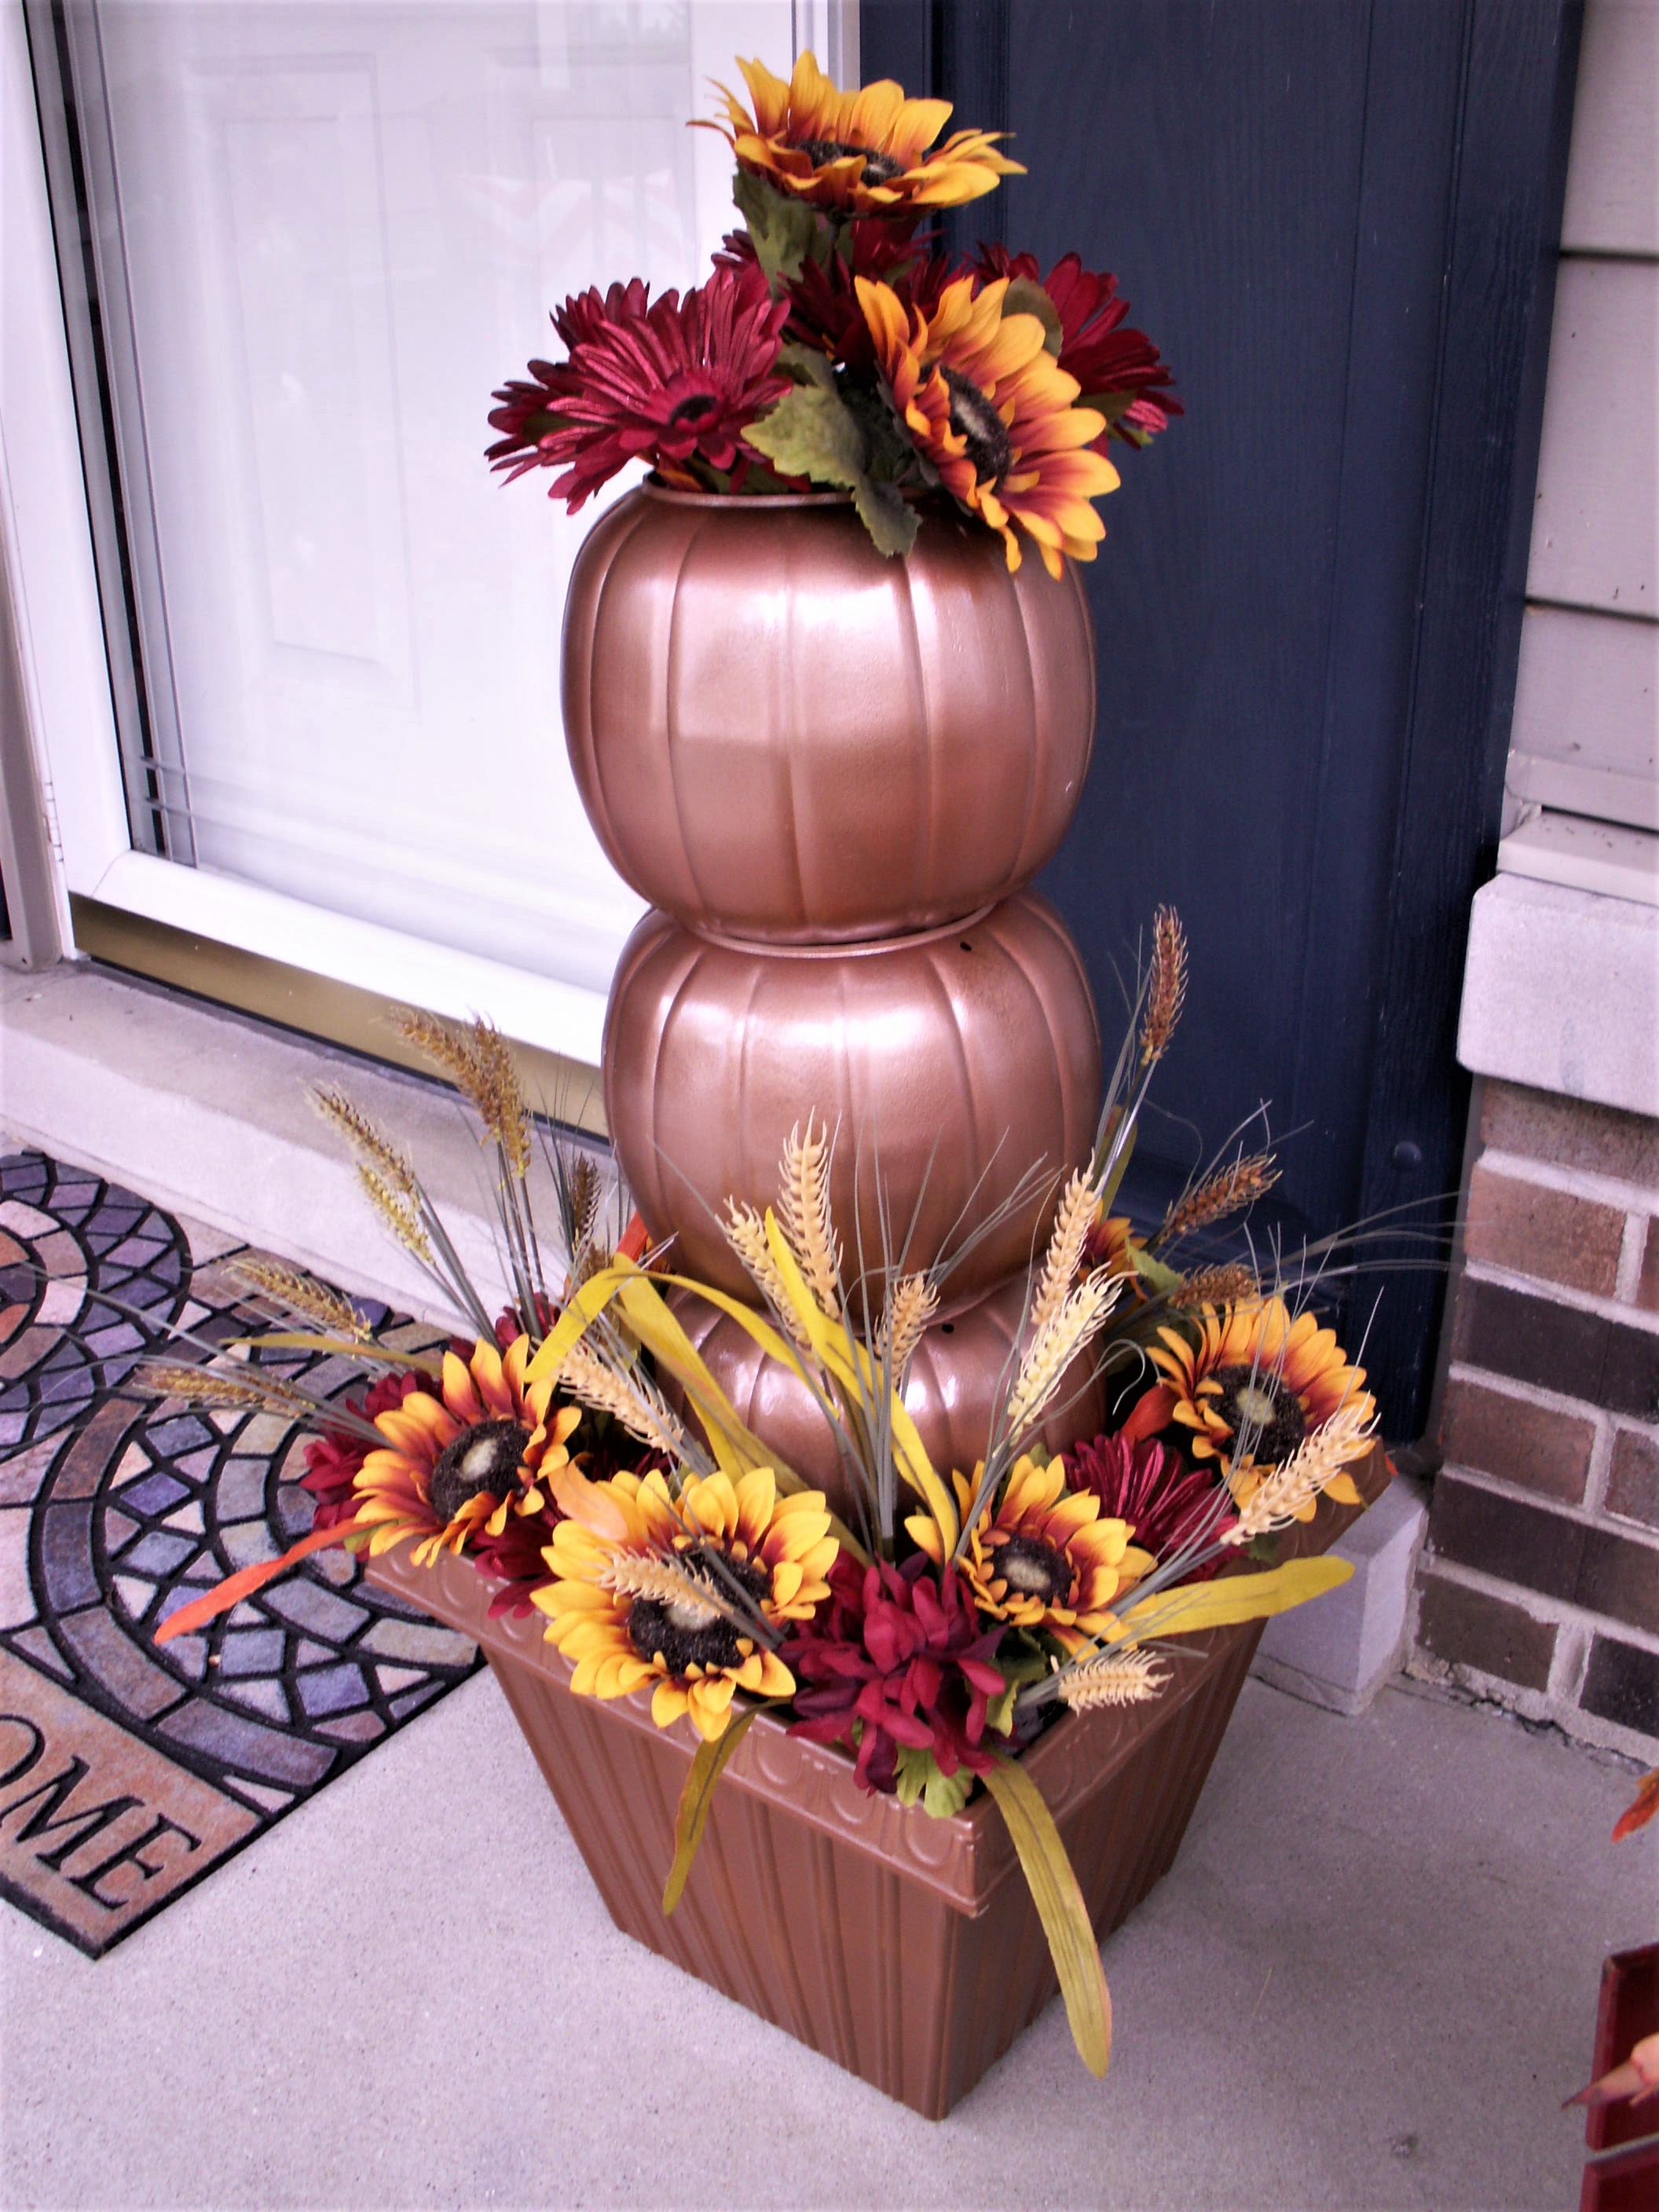 Ideas on how you can decorate your home indoors and outdoors for the fall season.